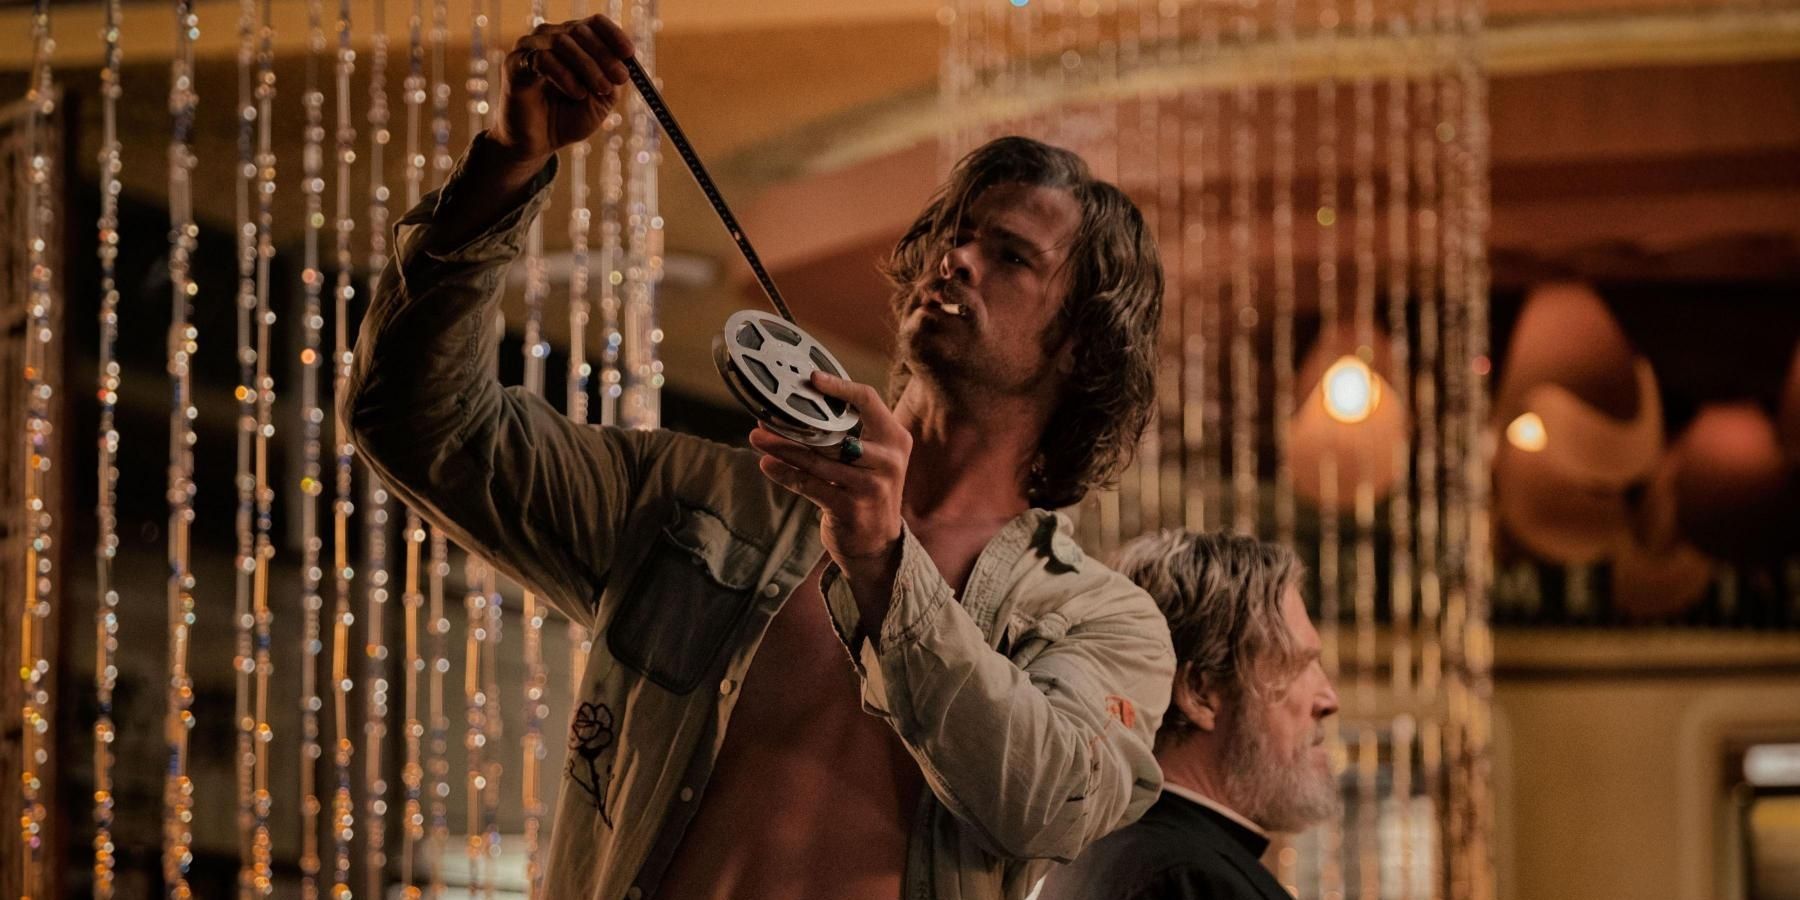 Chris Hemsworth in Bad Times At The El Royale